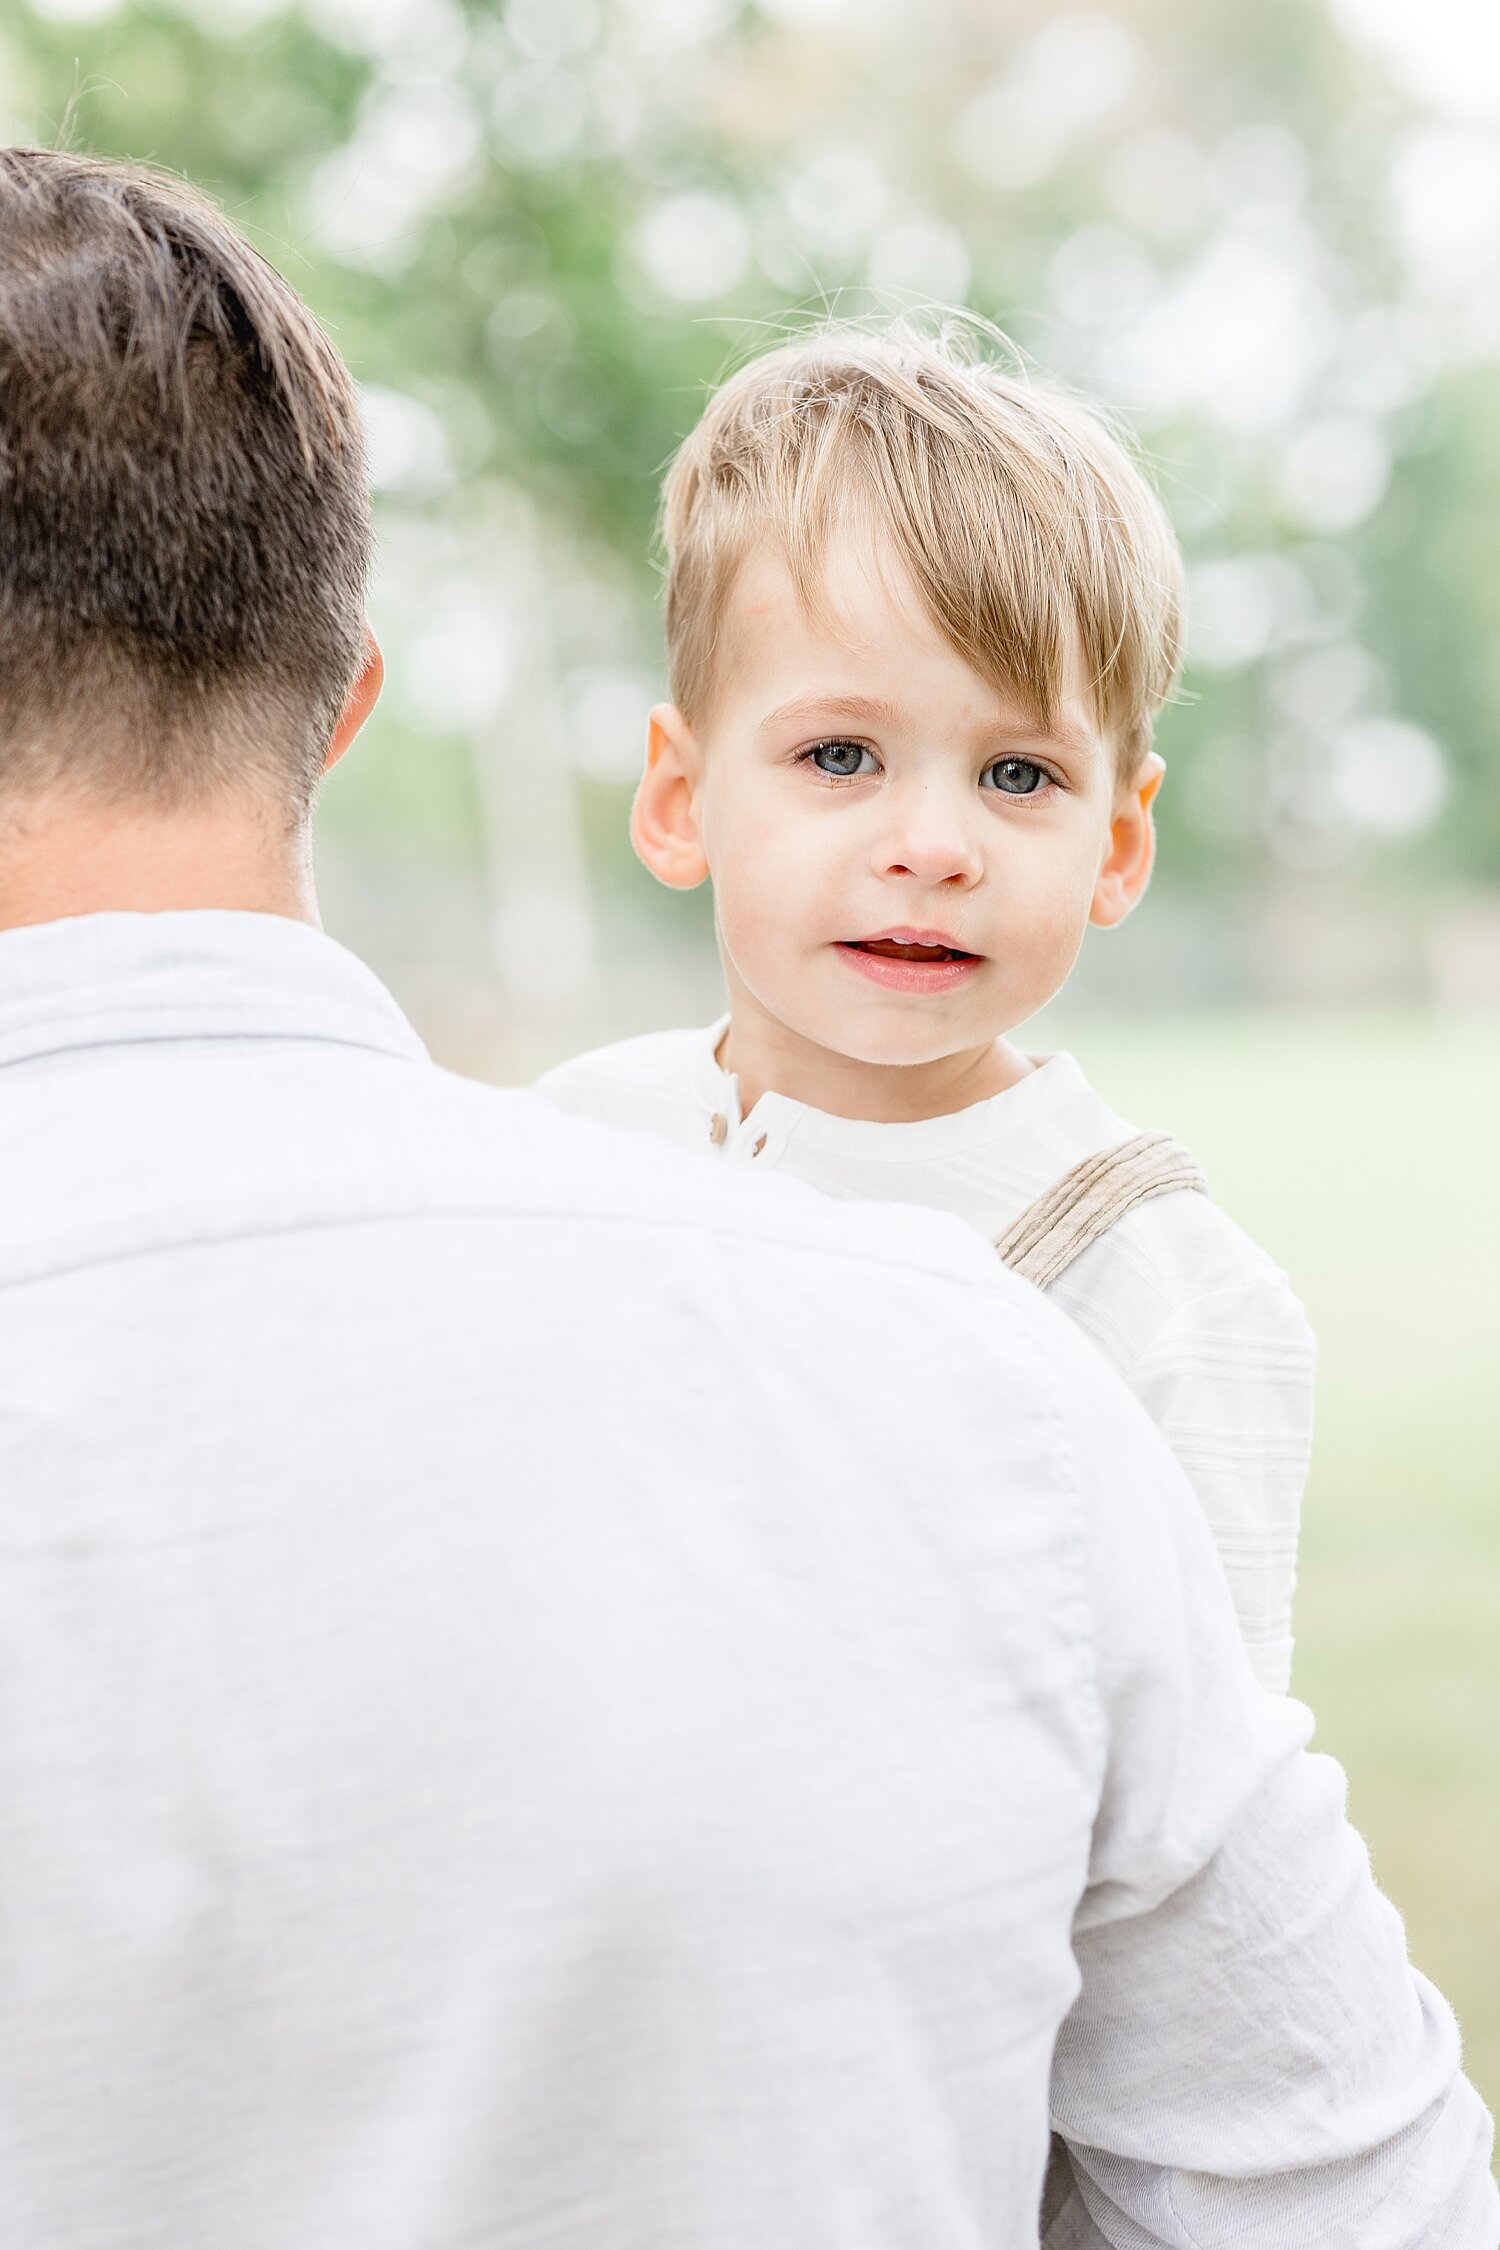 Father and son photo | Kristin Wood Photography